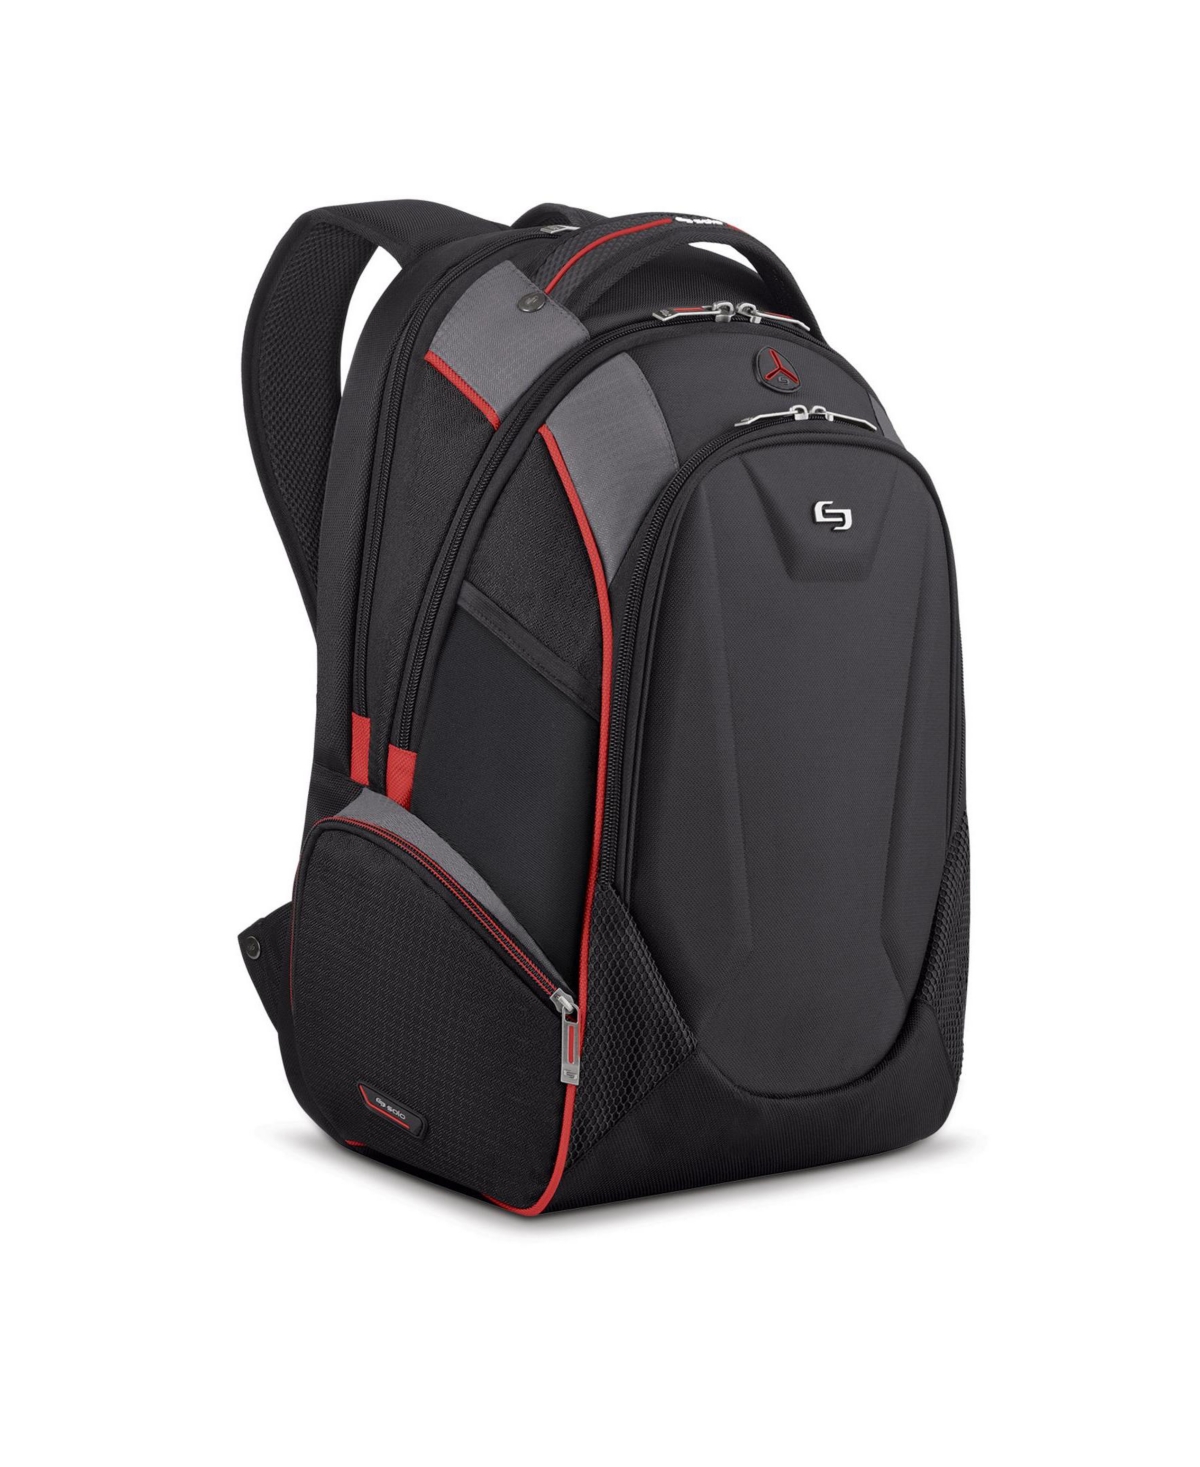 New York Launch 17.3" Backpack - Black, Gray with Red Trim